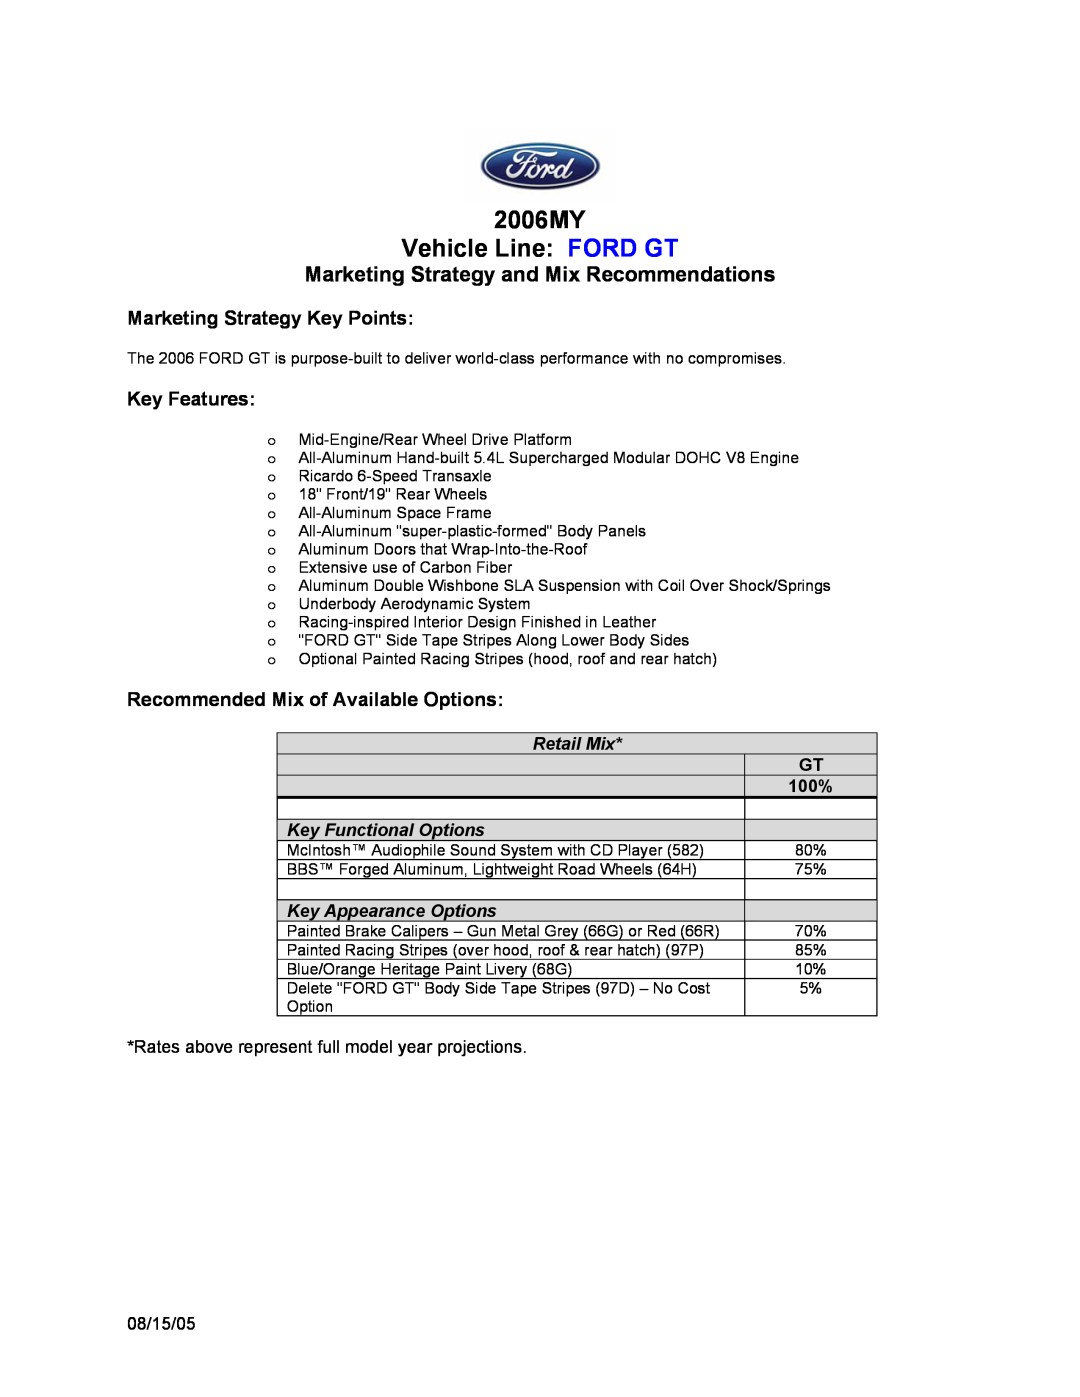 Ford manual 2006MY Vehicle Line FORD GT, Marketing Strategy and Mix Recommendations, Marketing Strategy Key Points 